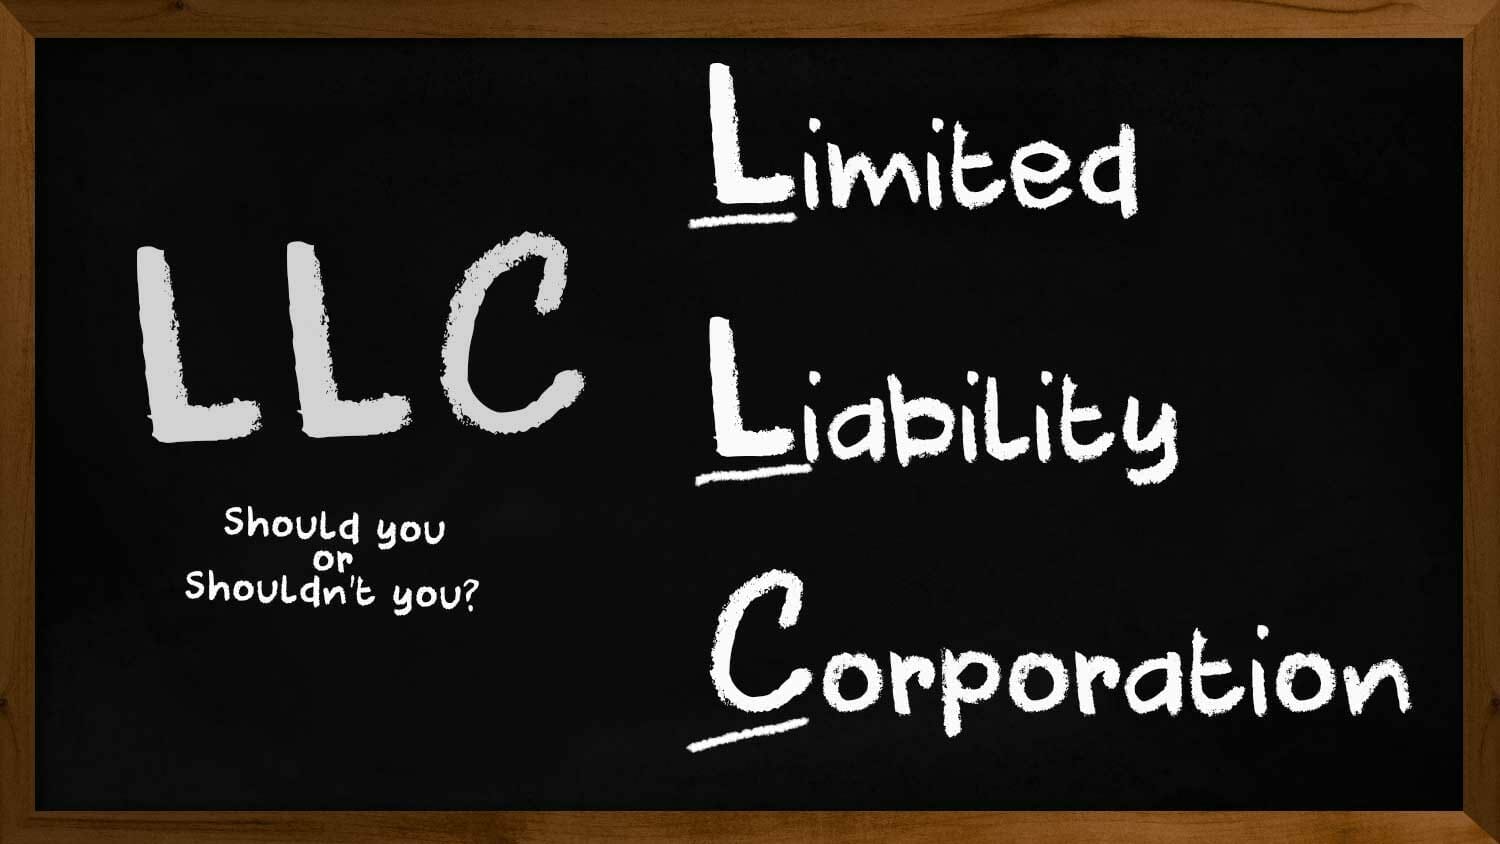 Owning real estate under an LLC has advantages, but it can